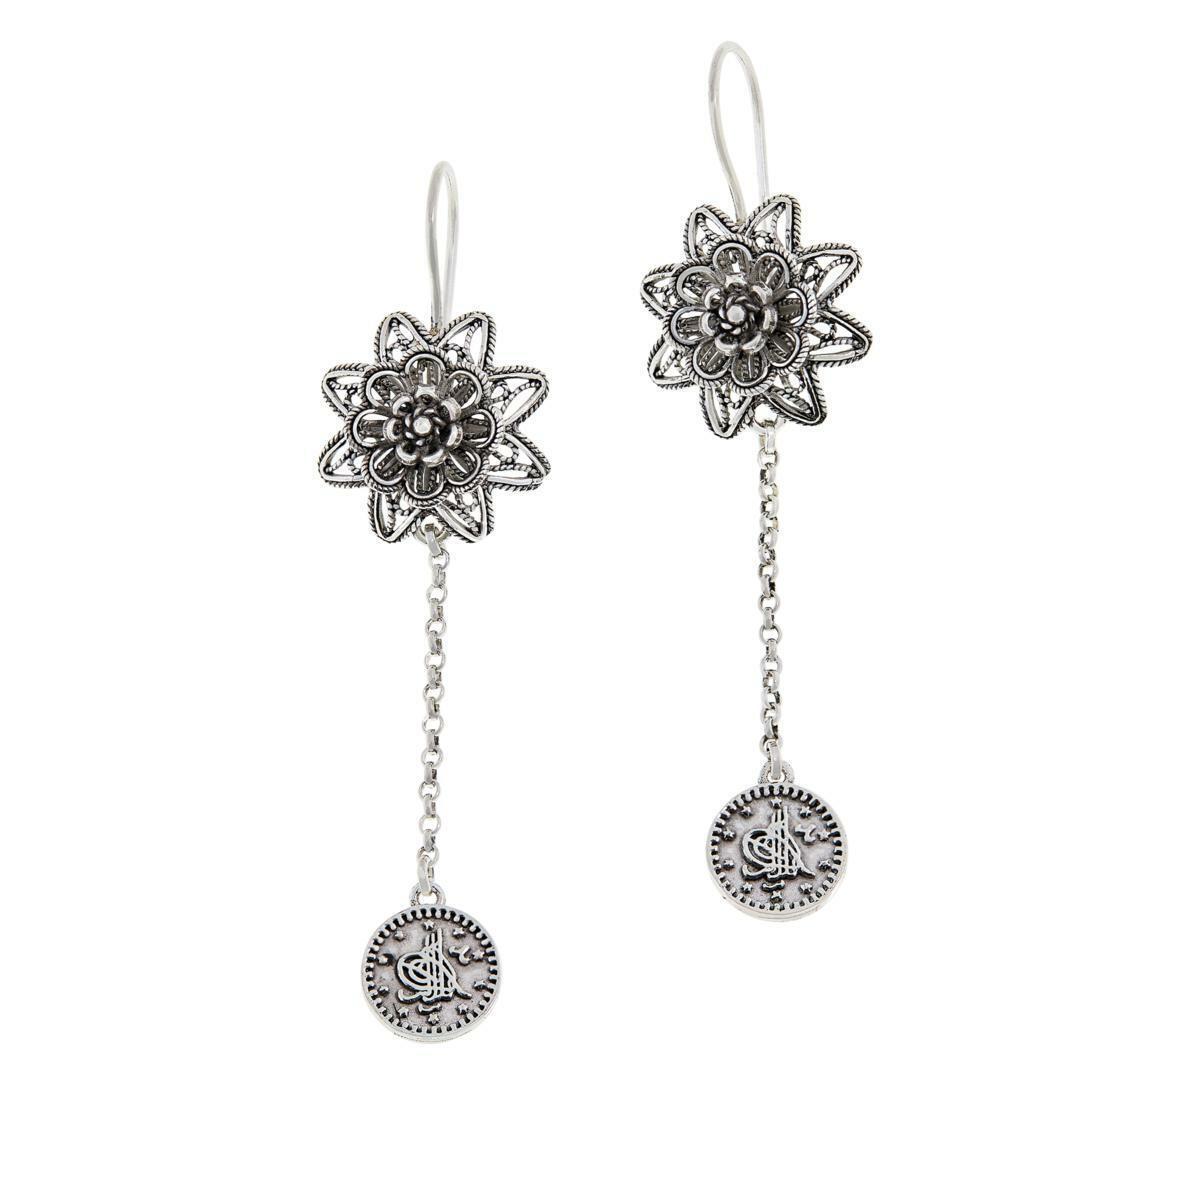 Ottoman Silver Jewelry Collection Filigree Coin Drop Earrings